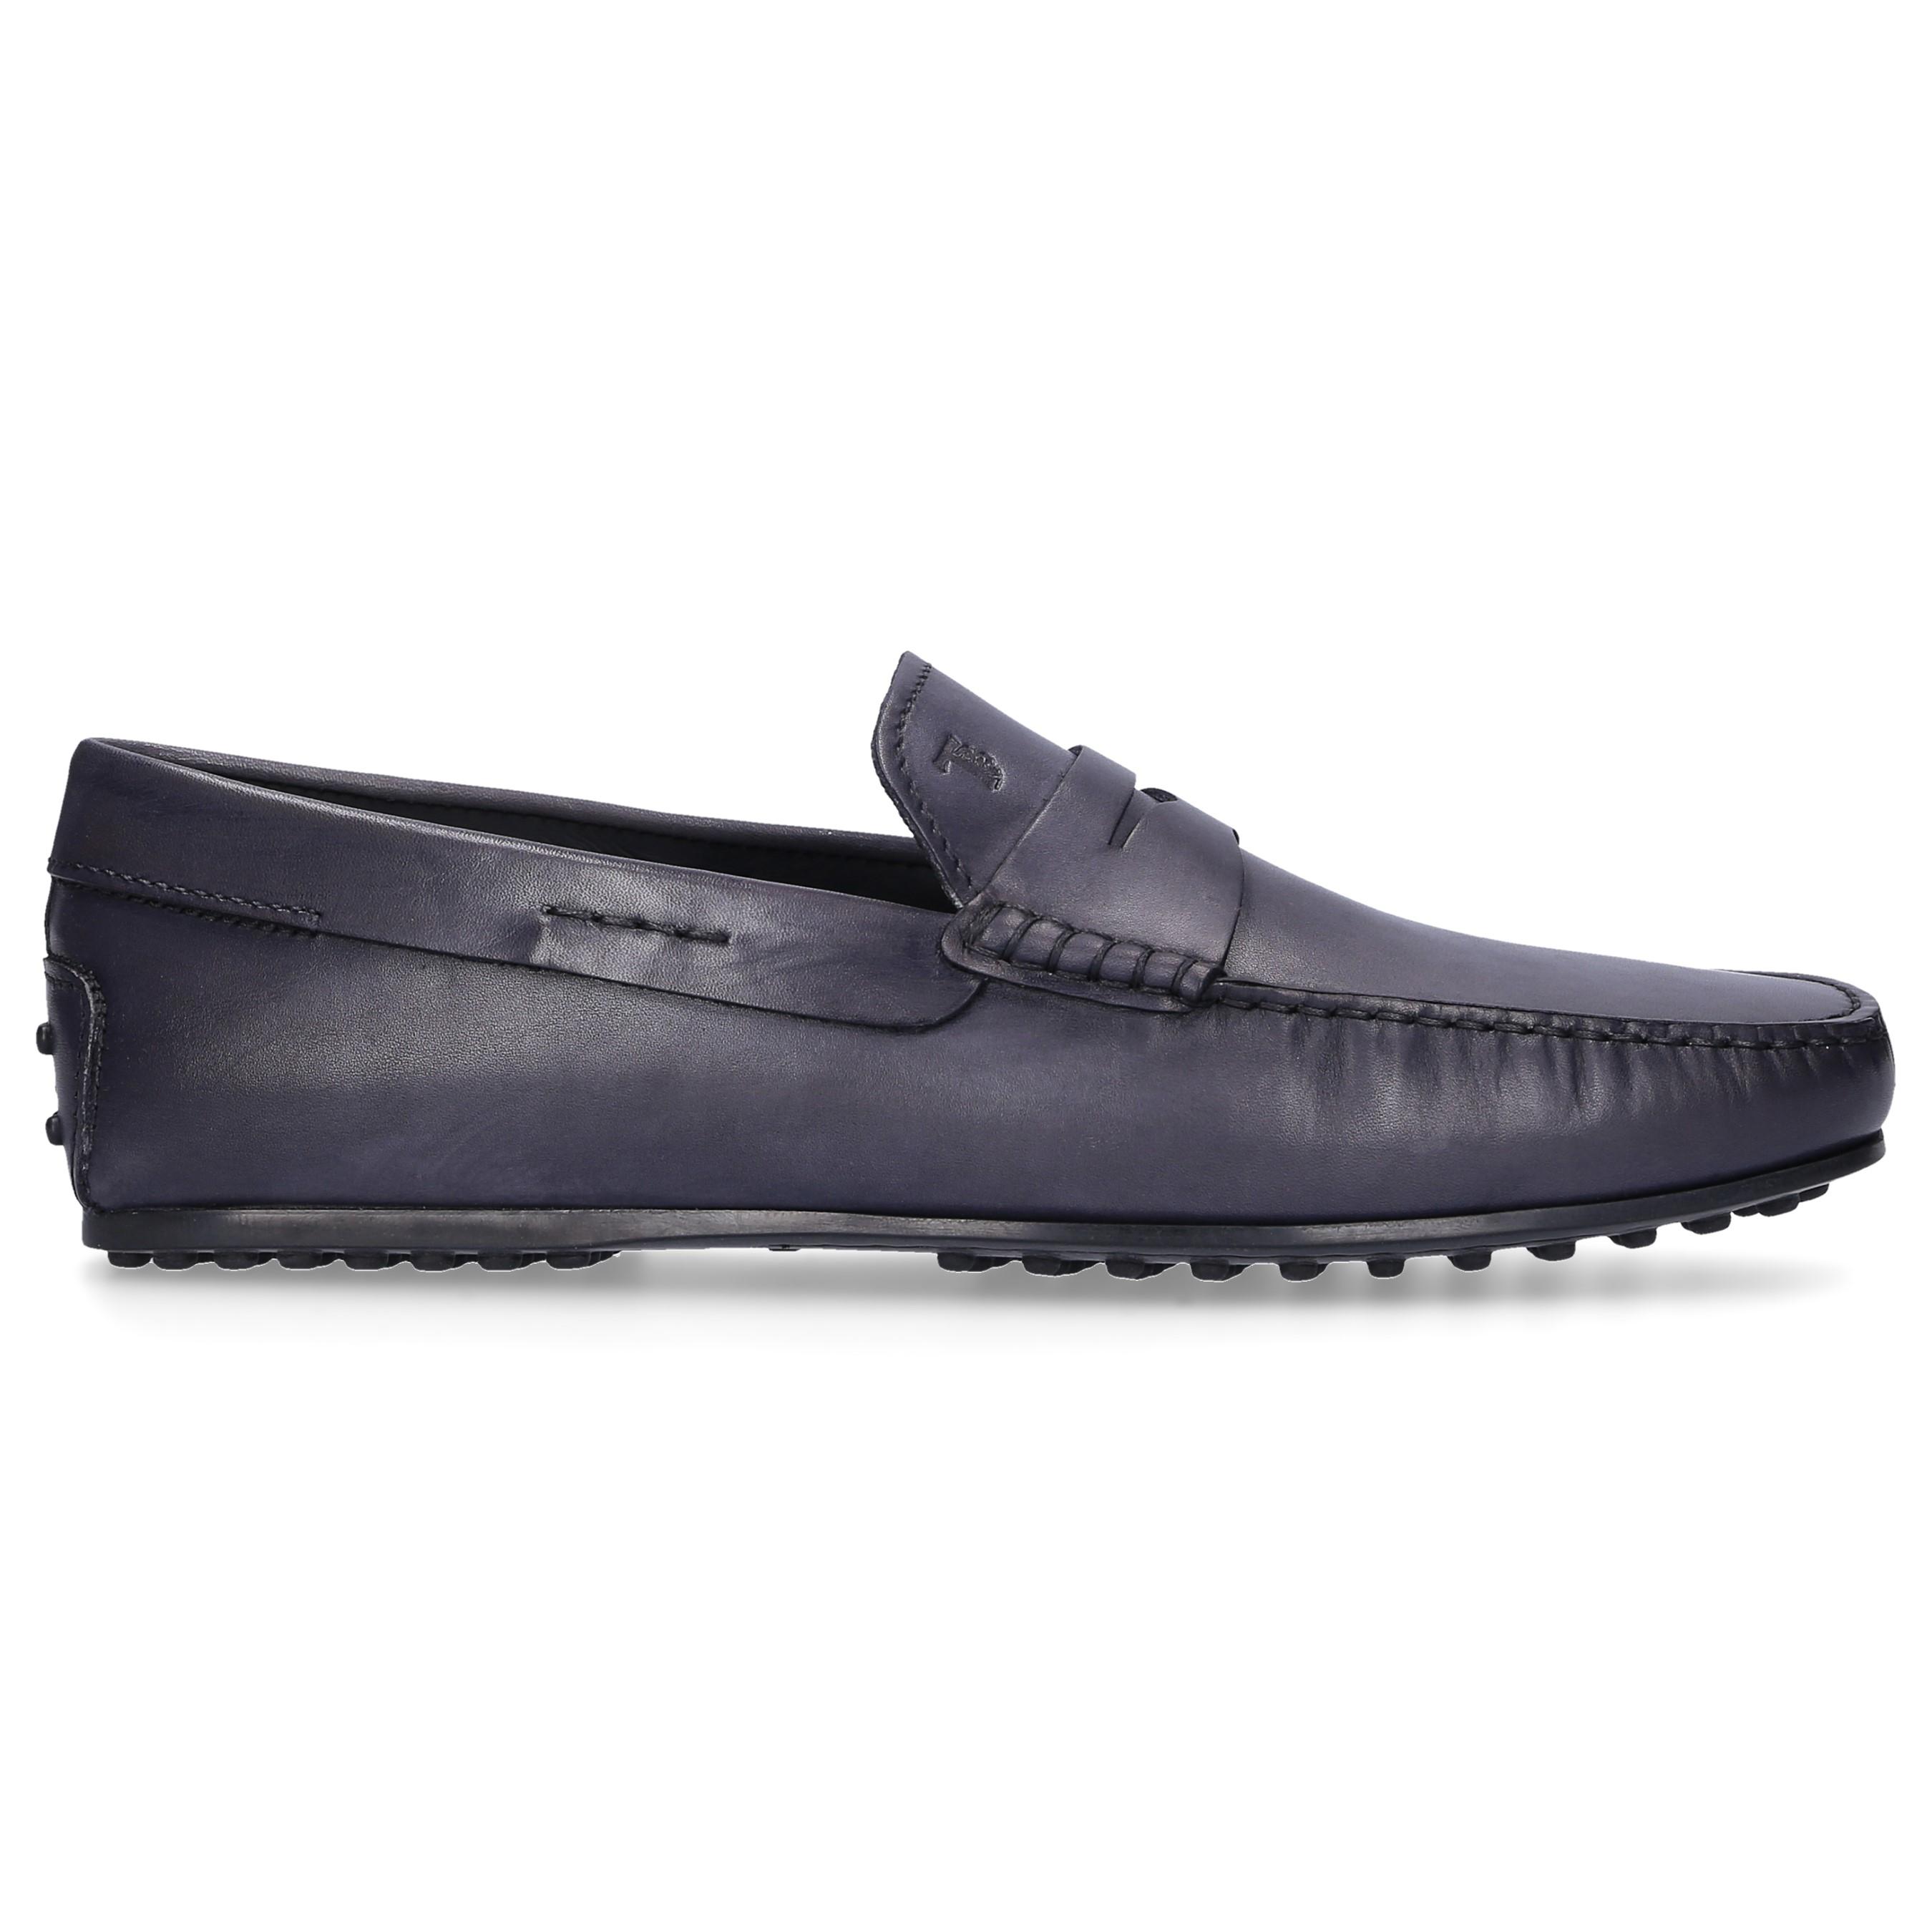 Tod's Leather Loafers Mocassino in Black for Men - Lyst